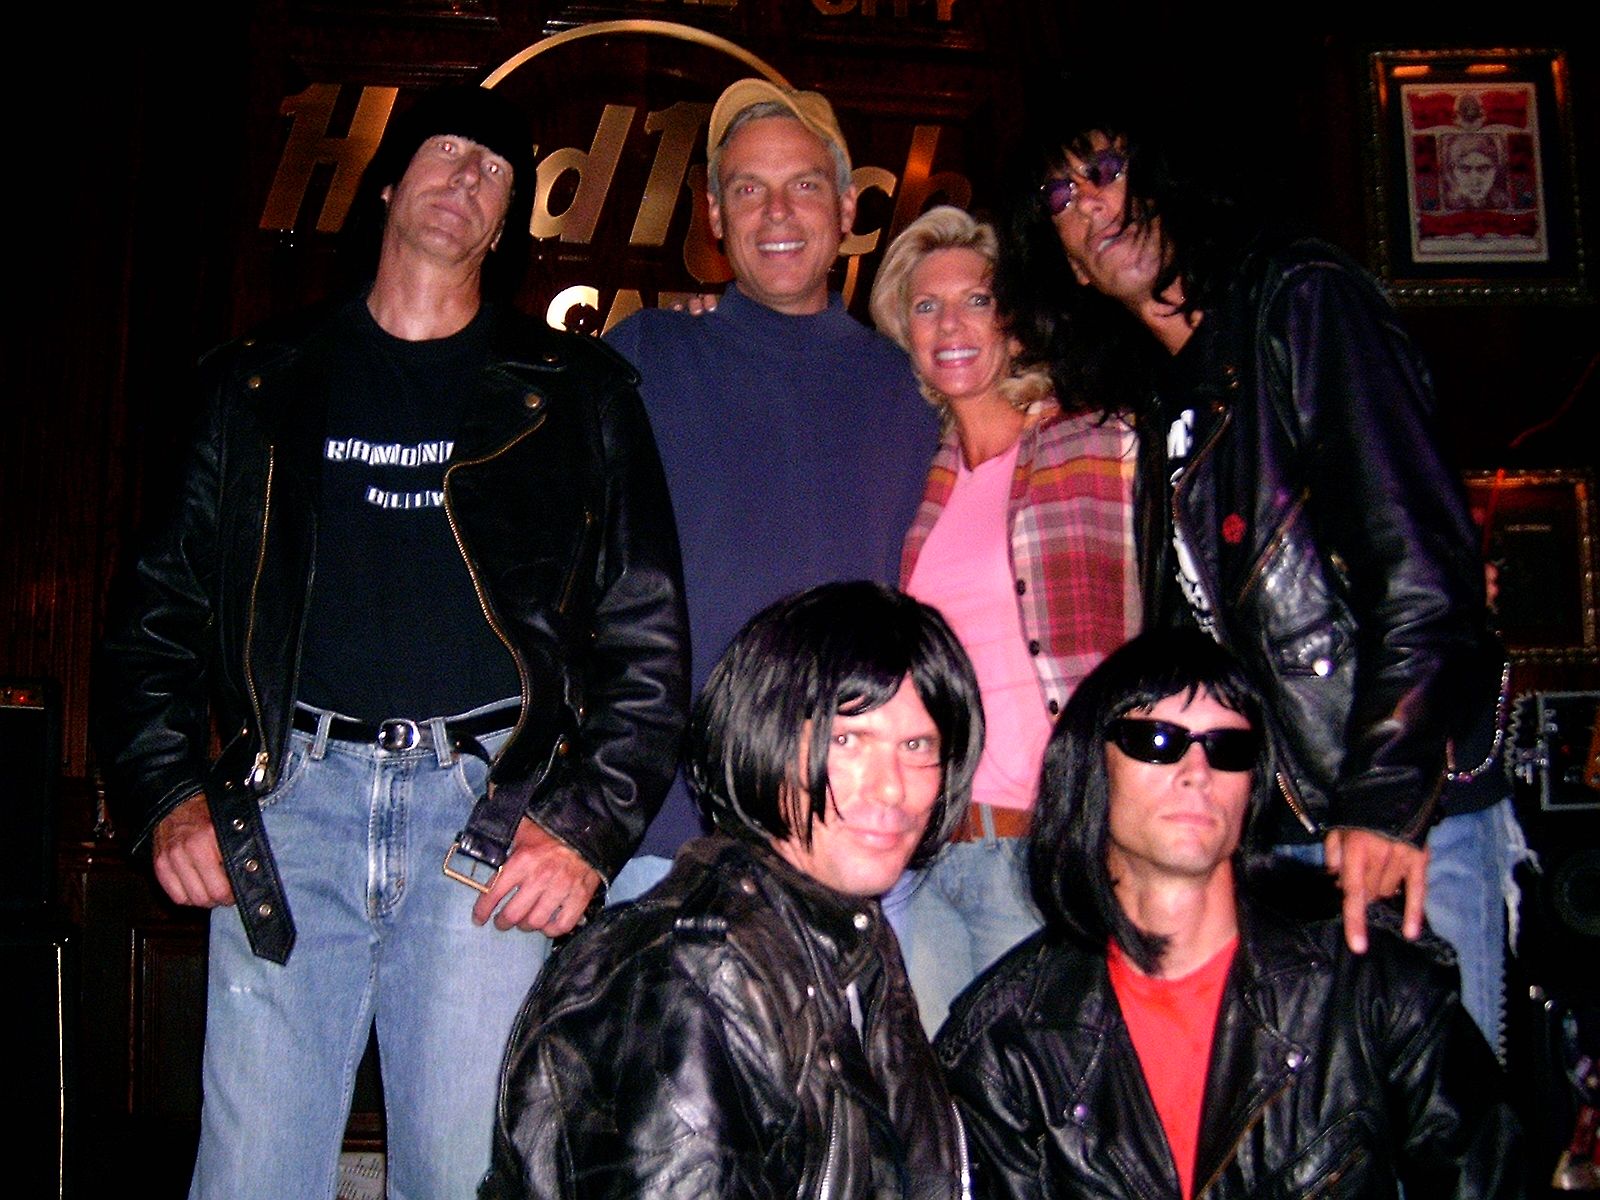 Utah Gov. Jon M. Huntsman and his hot First Lady Mary Kaye hang out with us (Ramones Alive) after our show at the Hard Rock Cafe in Salt Lake City. Gov. Huntsman (now the U.S. ambassador to China) is a BIG Ramones fan. That's me with my arm around the First Lady, of course. The Huntsmans are WONDERFUL people, especially for Republicans.